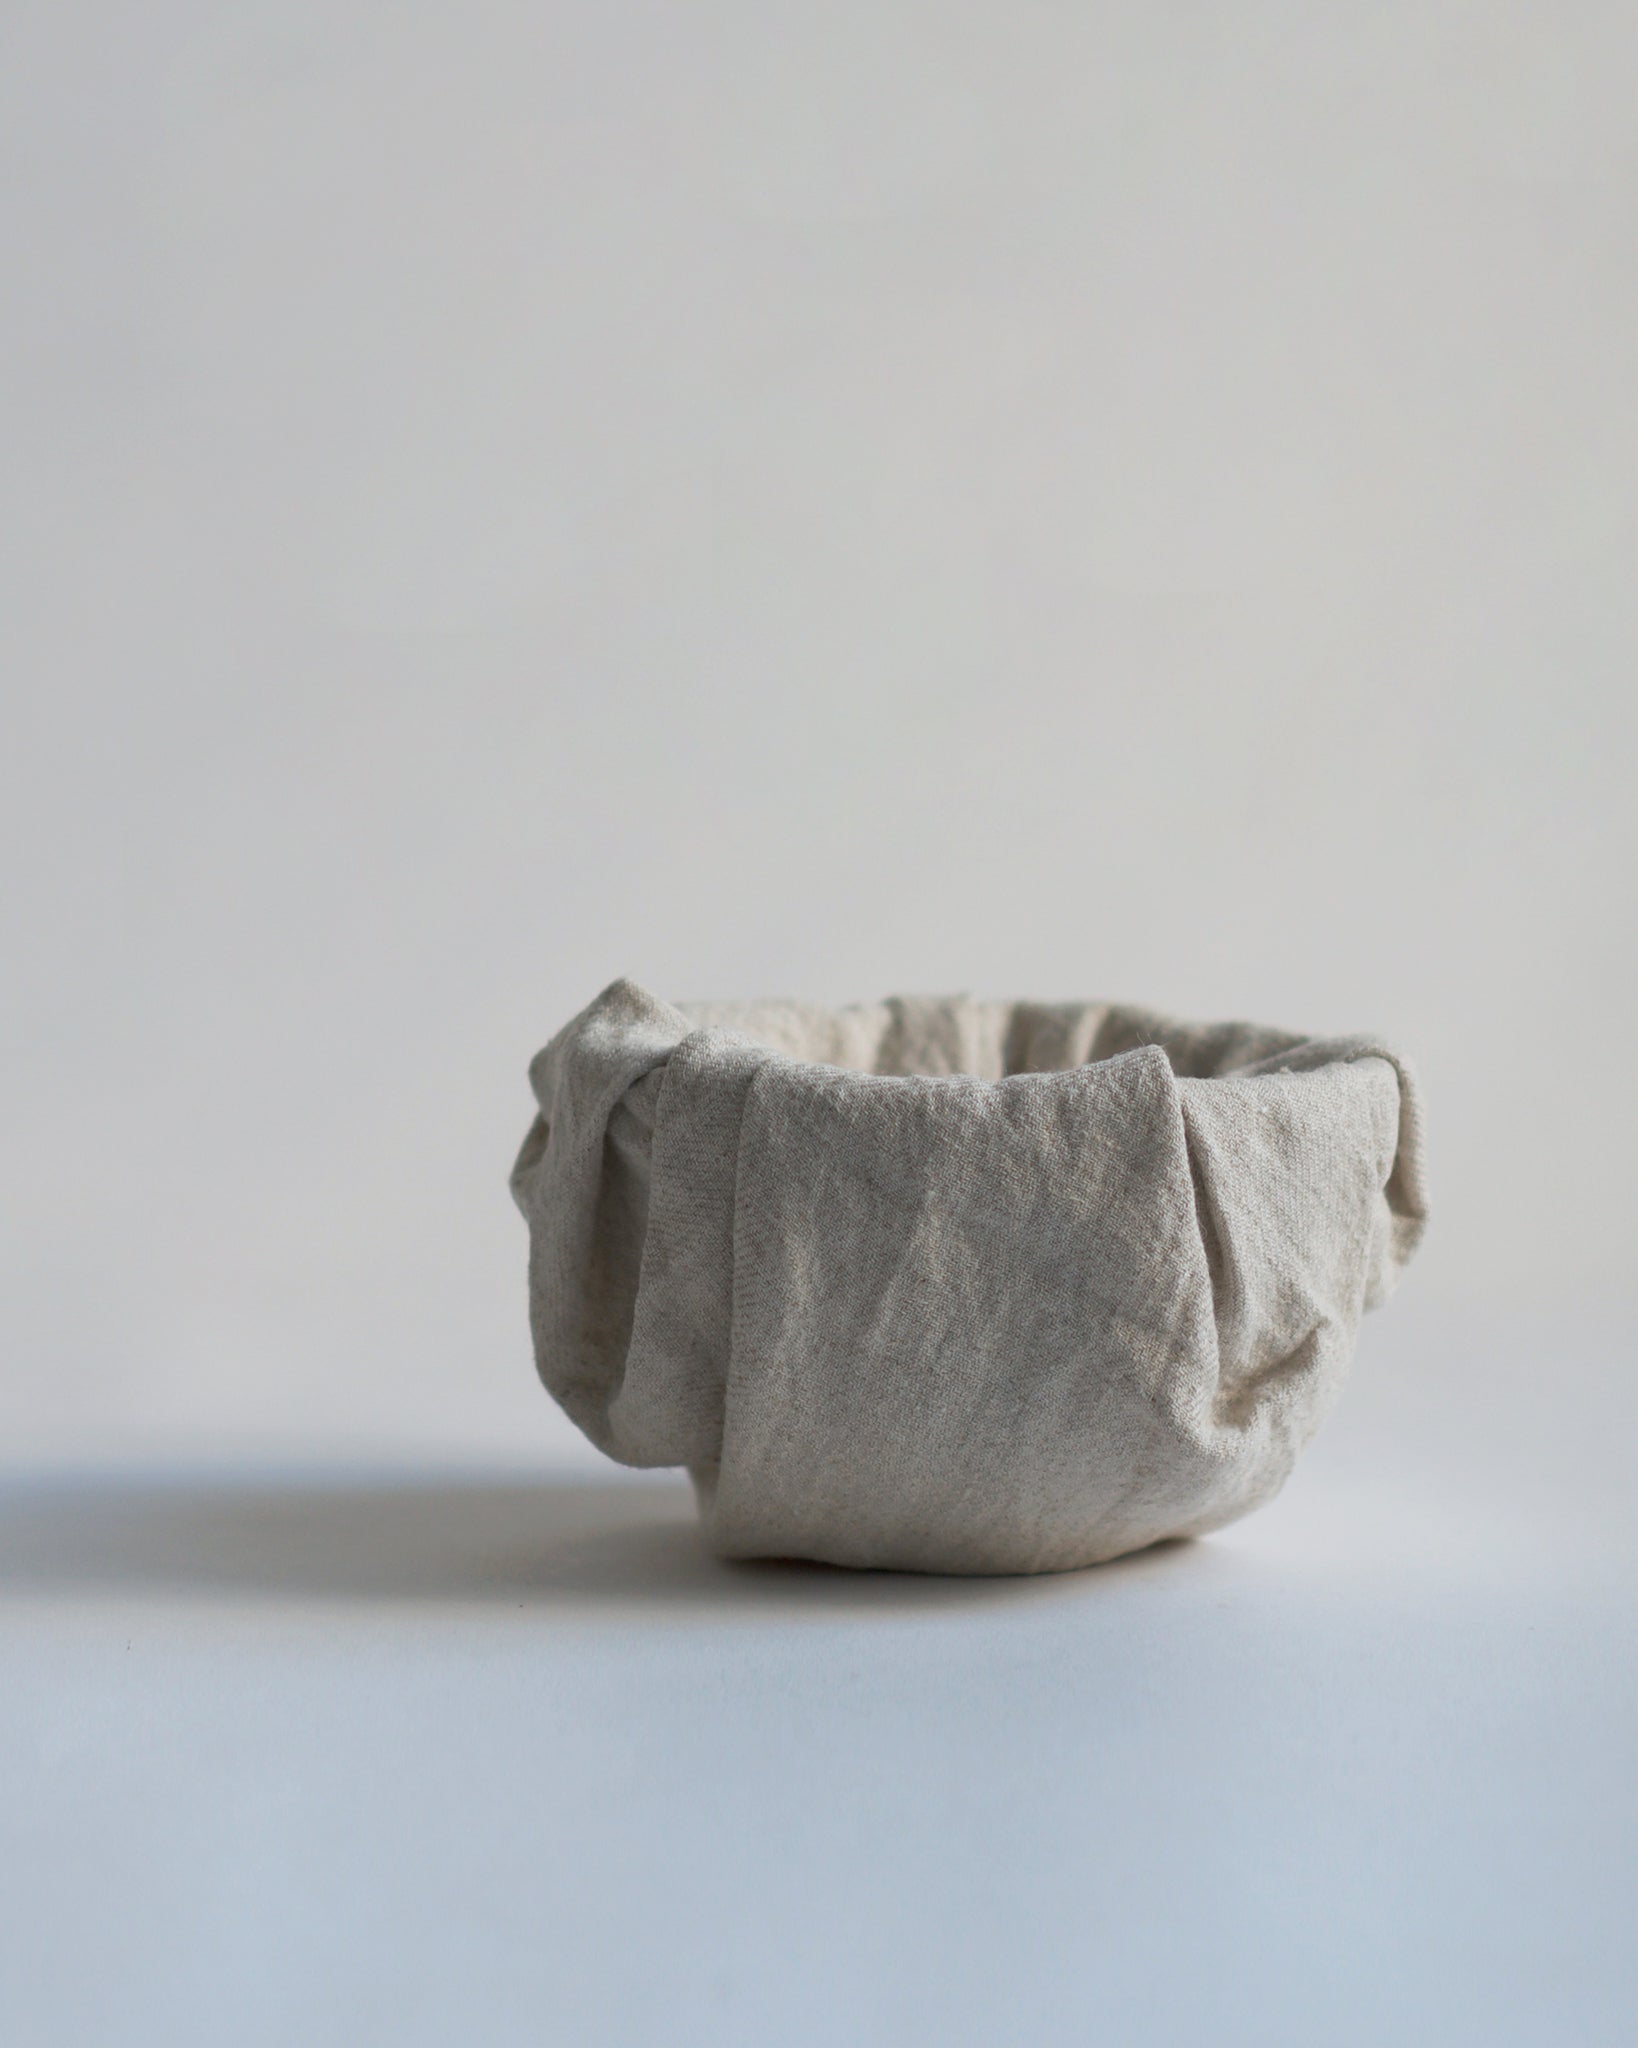 Gold Chawan IV wrapped in cloth against gray background.